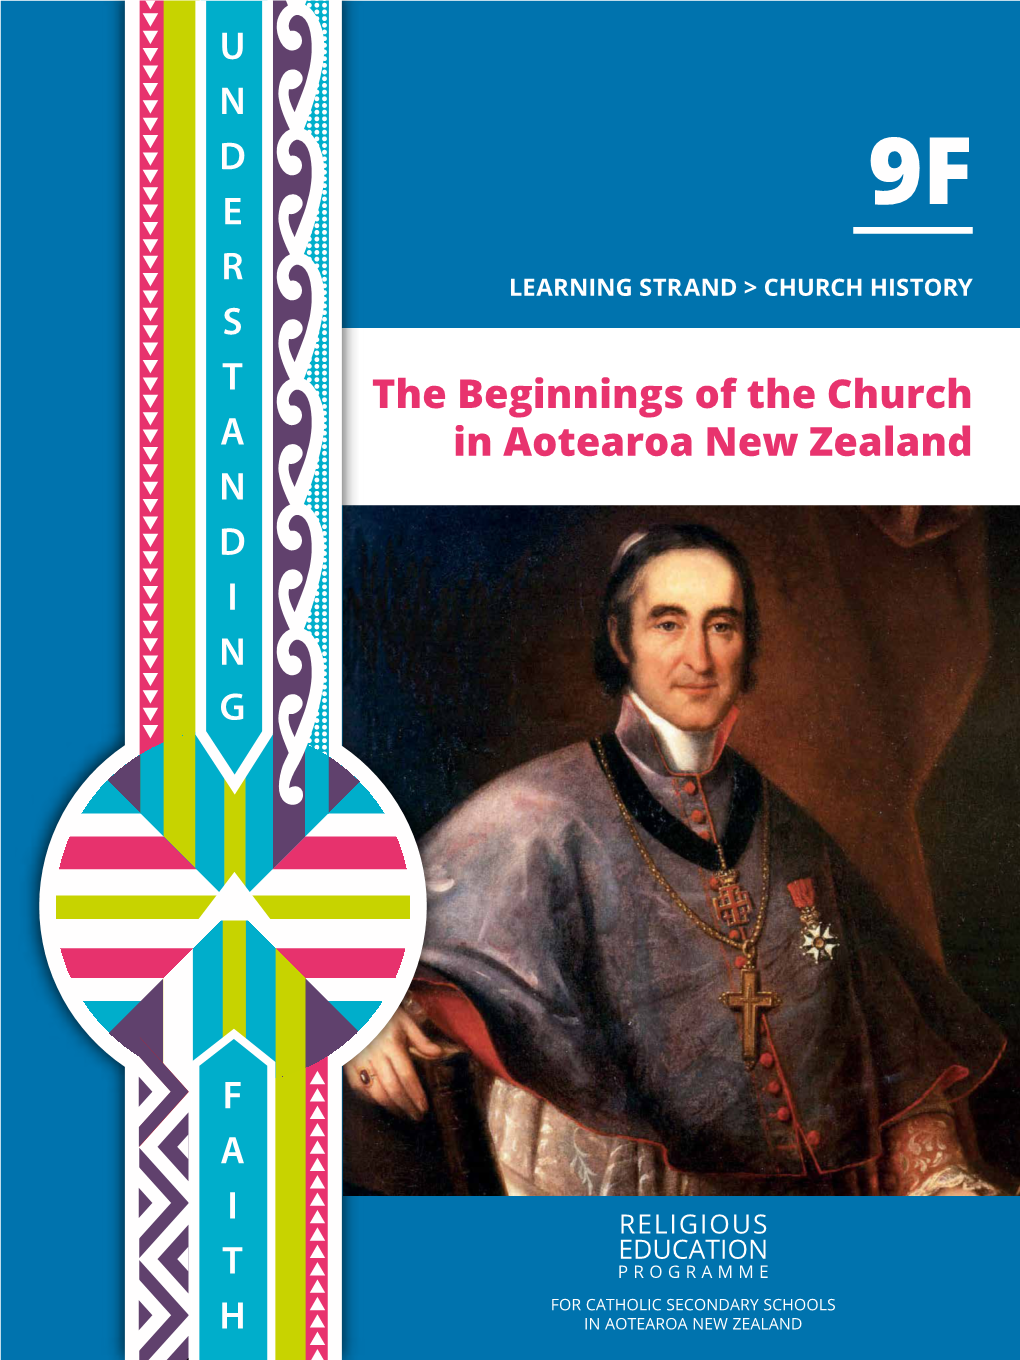 Bishop Pompallier and His Faith and Trained As Catechists